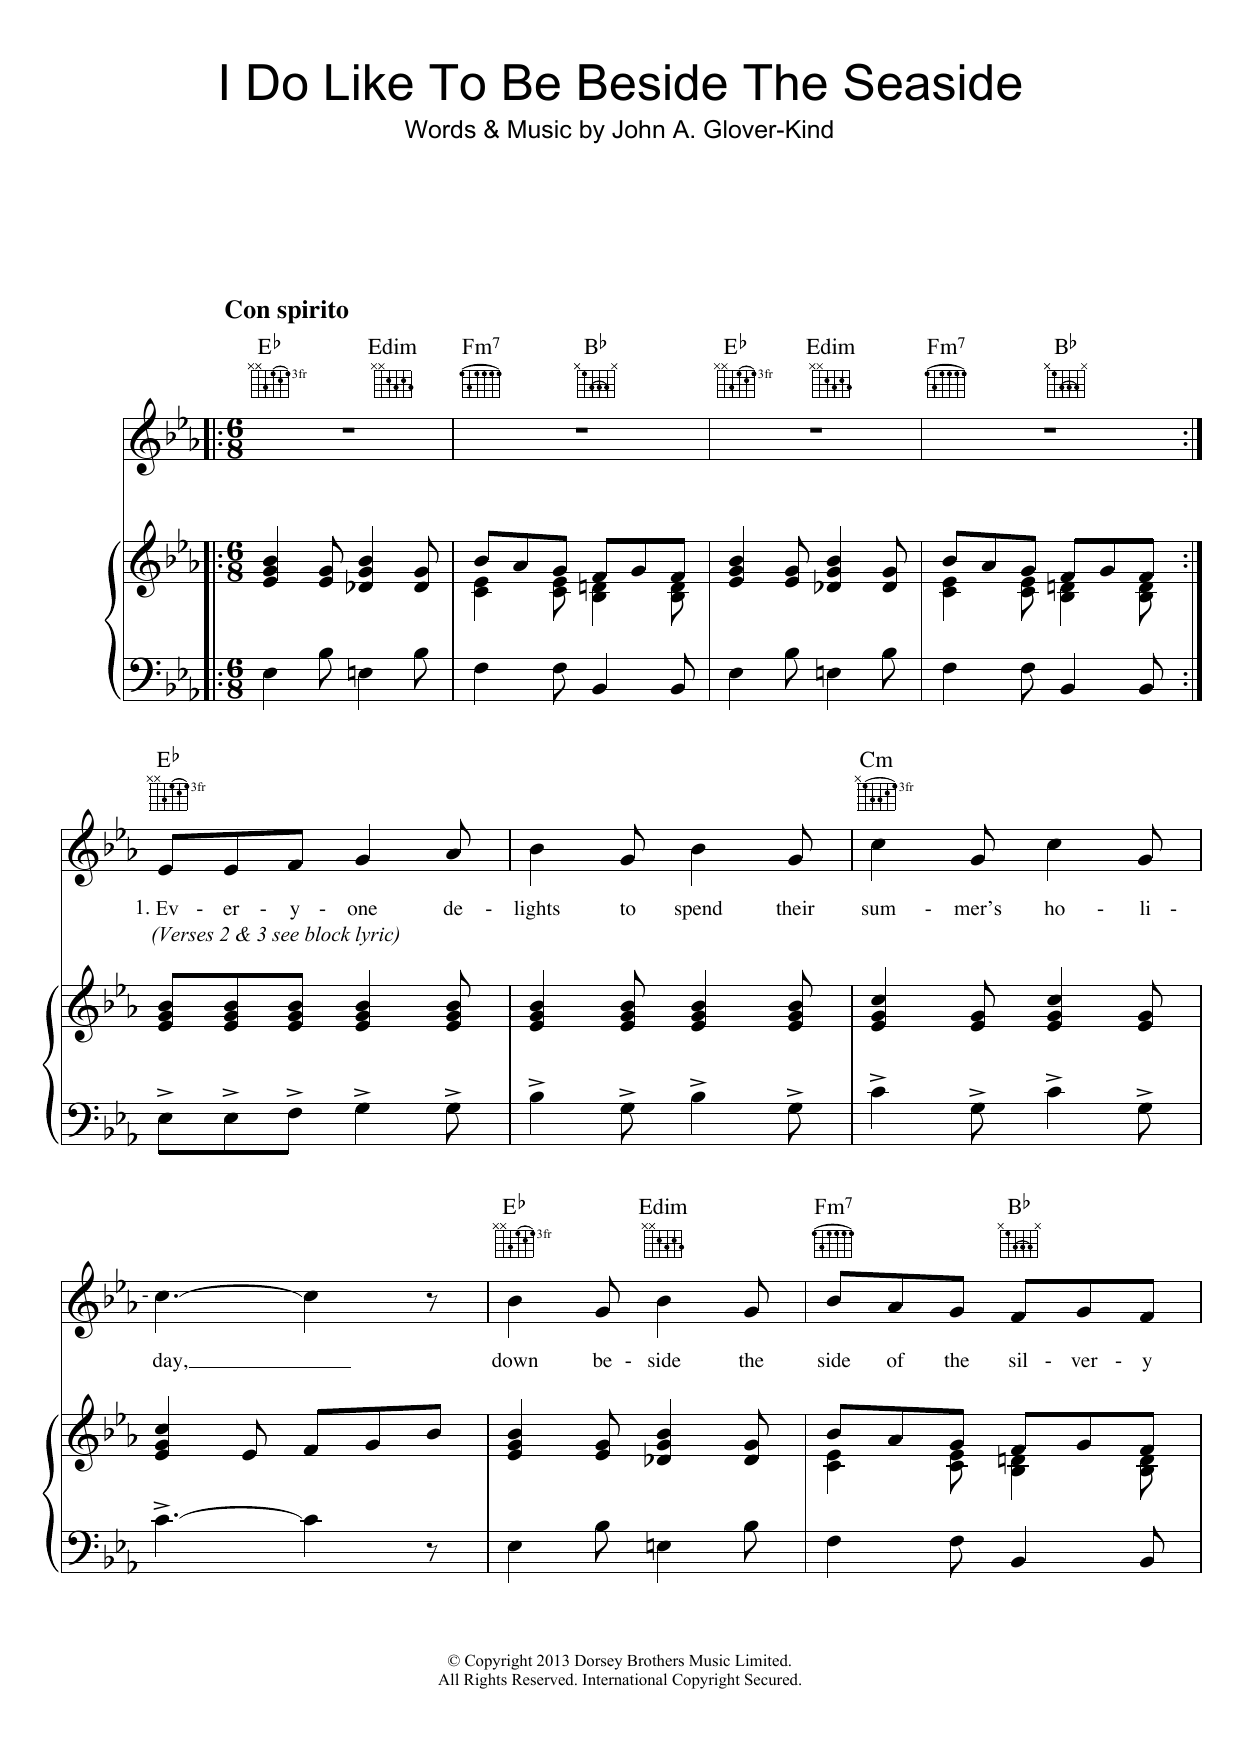 John Glover-Kind I Do Like To Be Beside The Seaside sheet music notes and chords. Download Printable PDF.